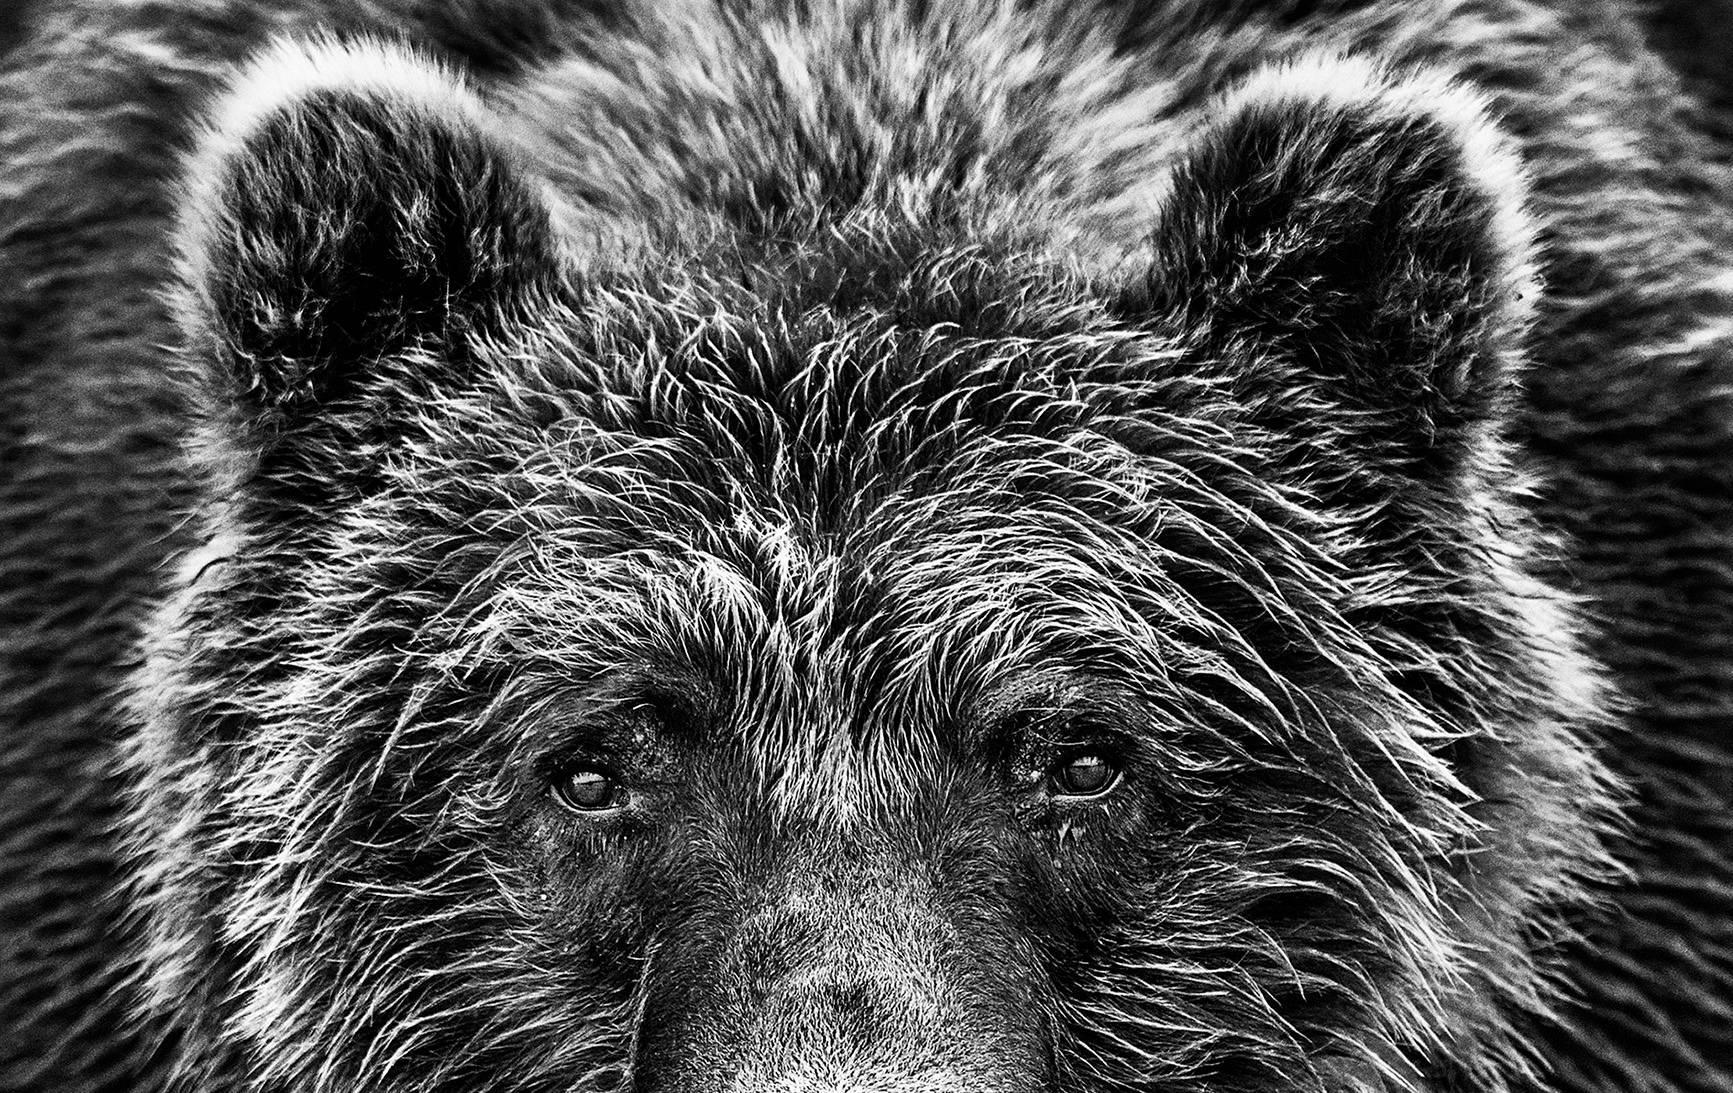 Face Off - Photograph by David Yarrow